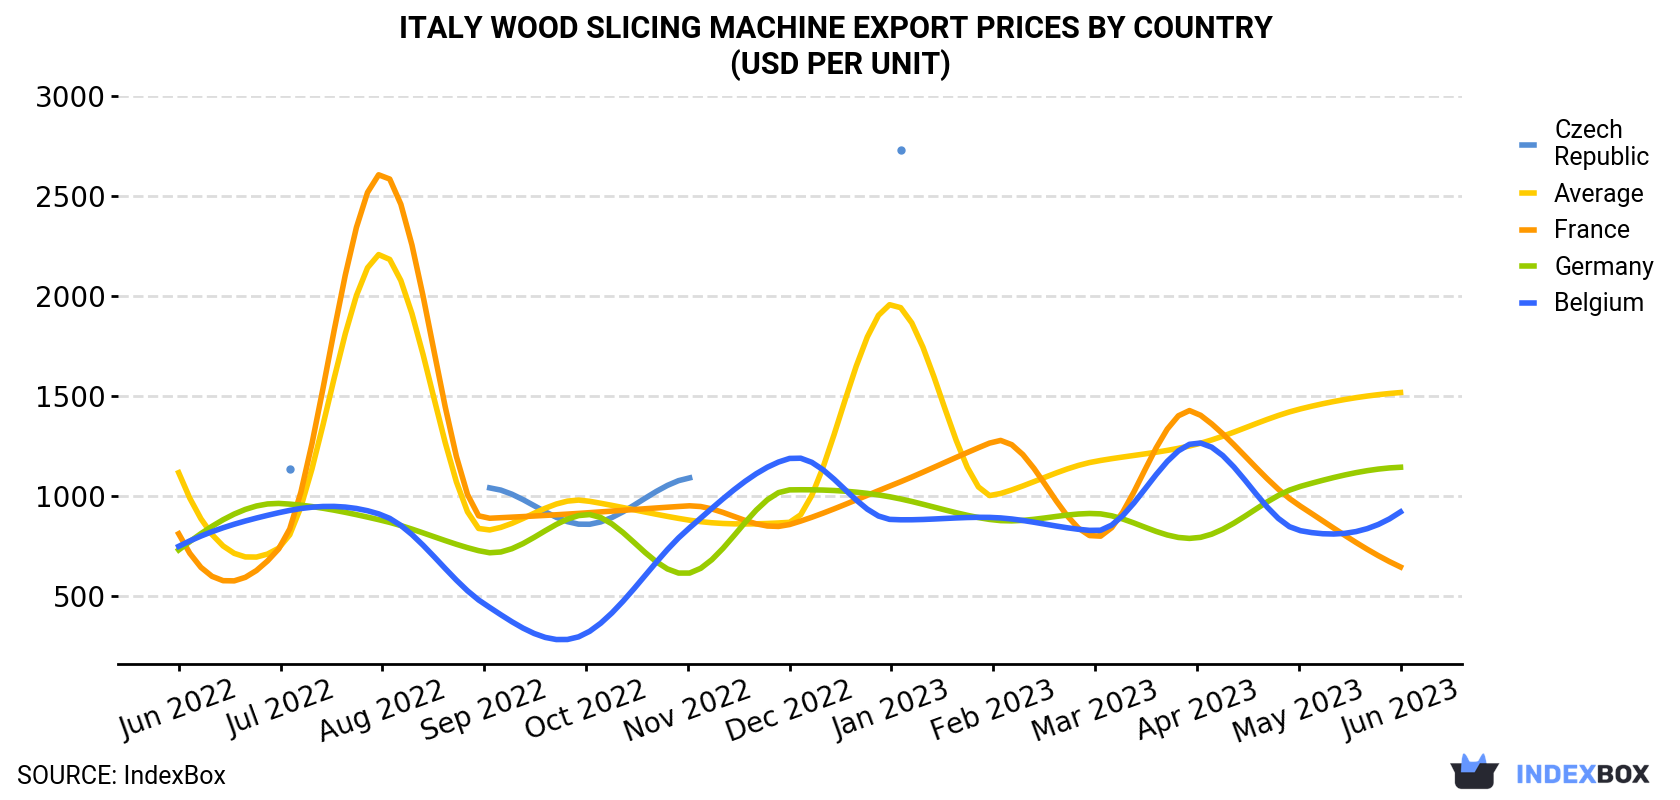 Italy Wood Slicing Machine Export Prices By Country (USD Per Unit)